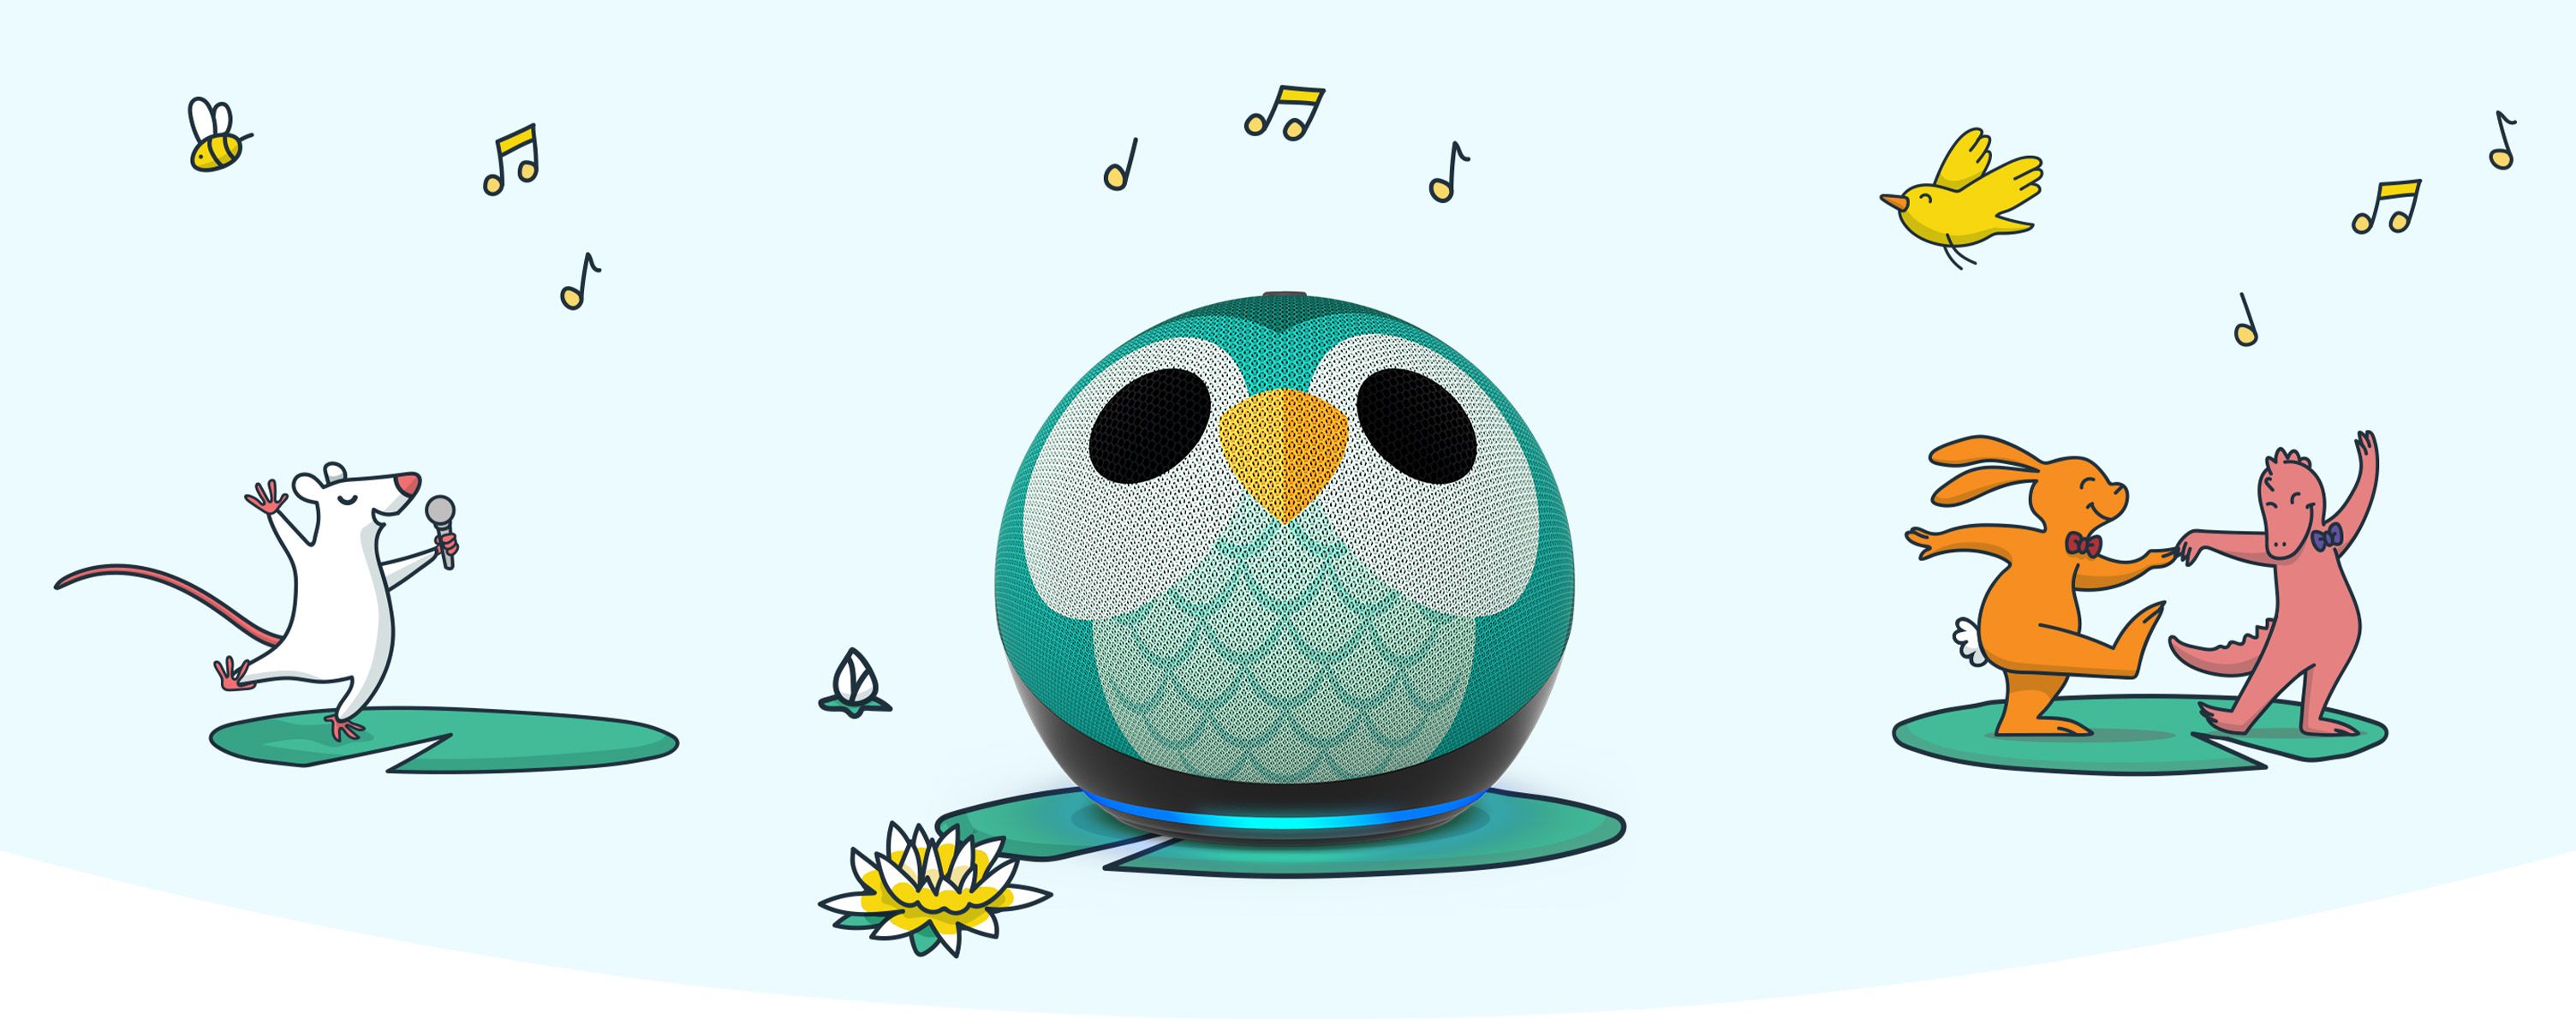 All-New Echo Dot (5th Gen, 2022 release) Kids | Designed for kids, with parental controls | Owl | Amazon (US)